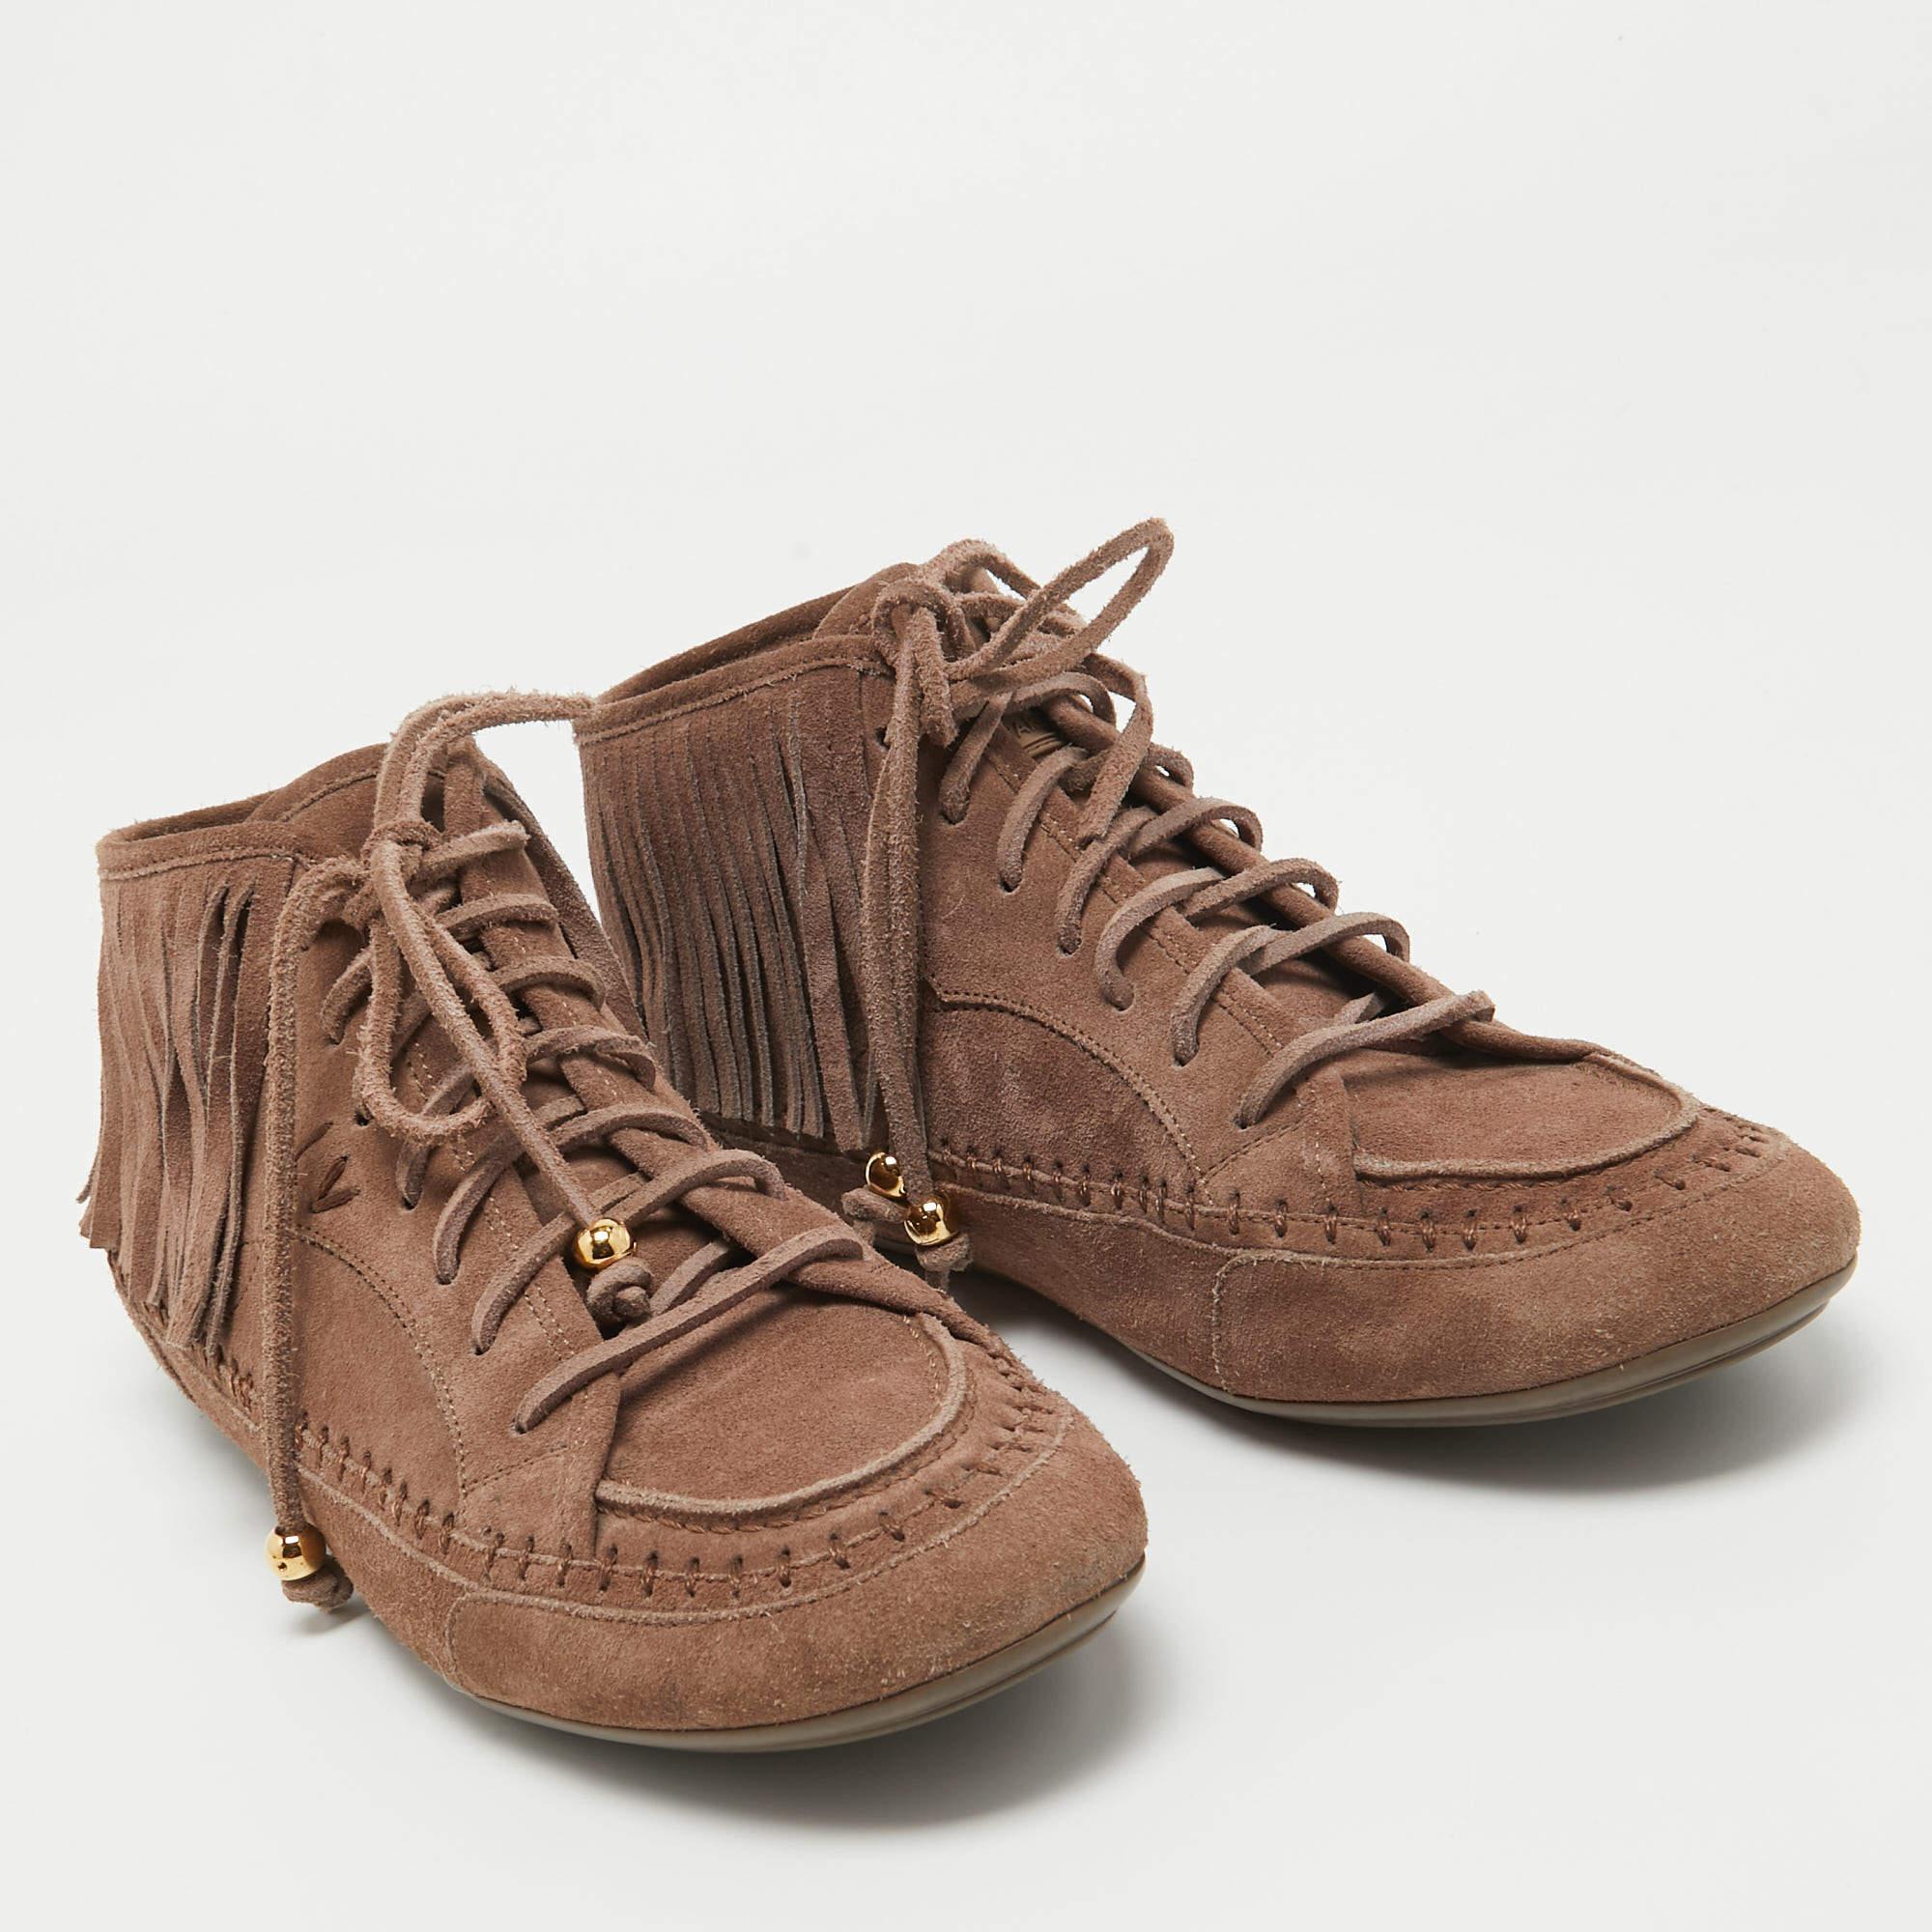 Louis Vuitton Brown Suede Fringe Details High Sneakers Size 39 For Sale 2